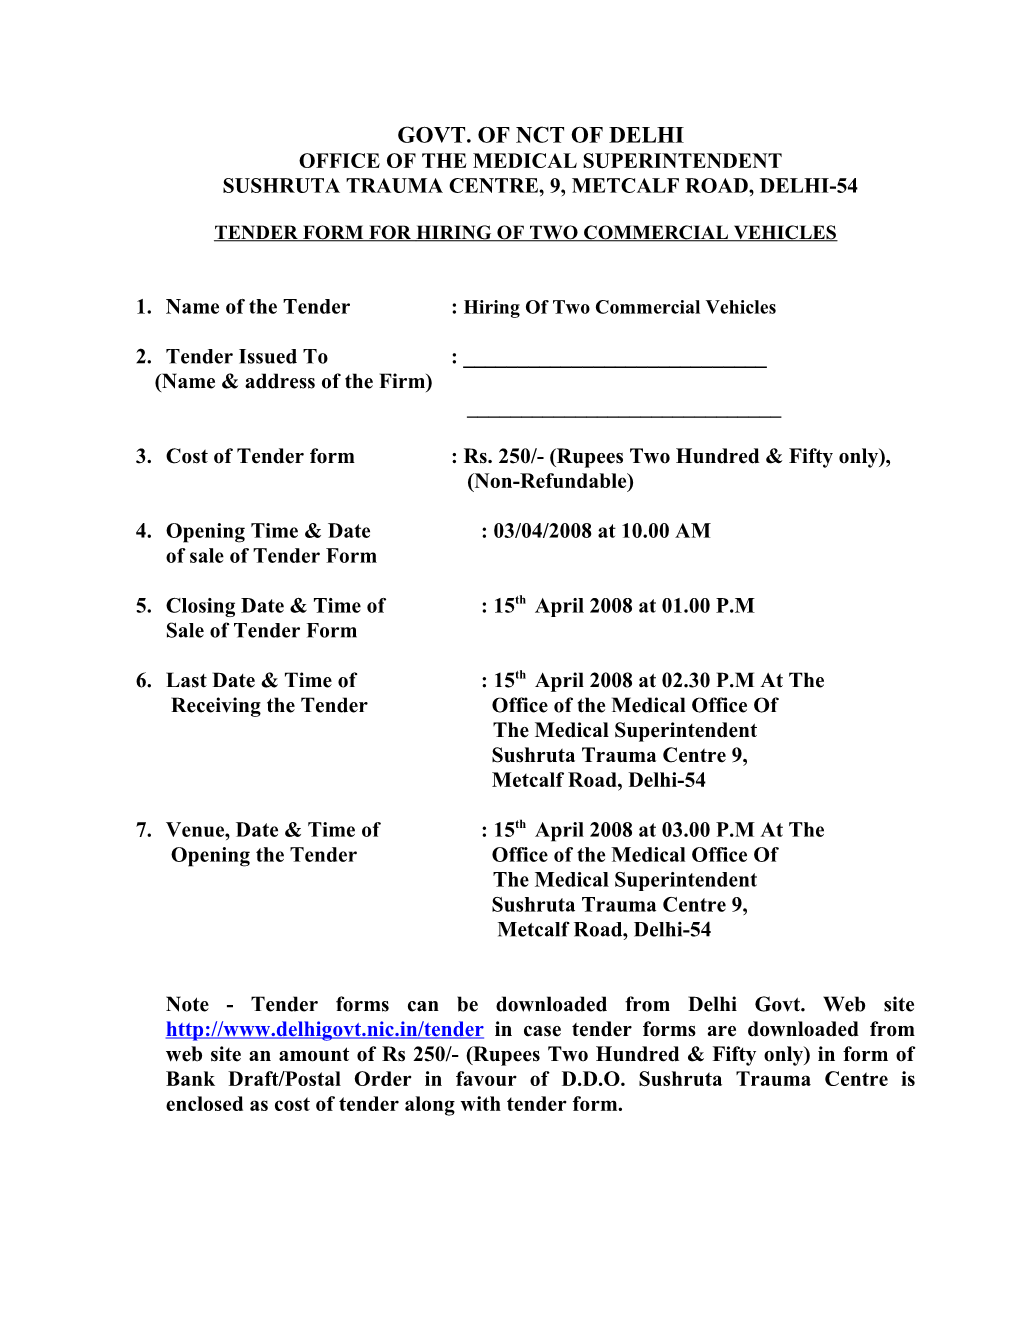 Terms and Conditions for Hiring of Commercial Vehicles for One Year from the Date of a Ward